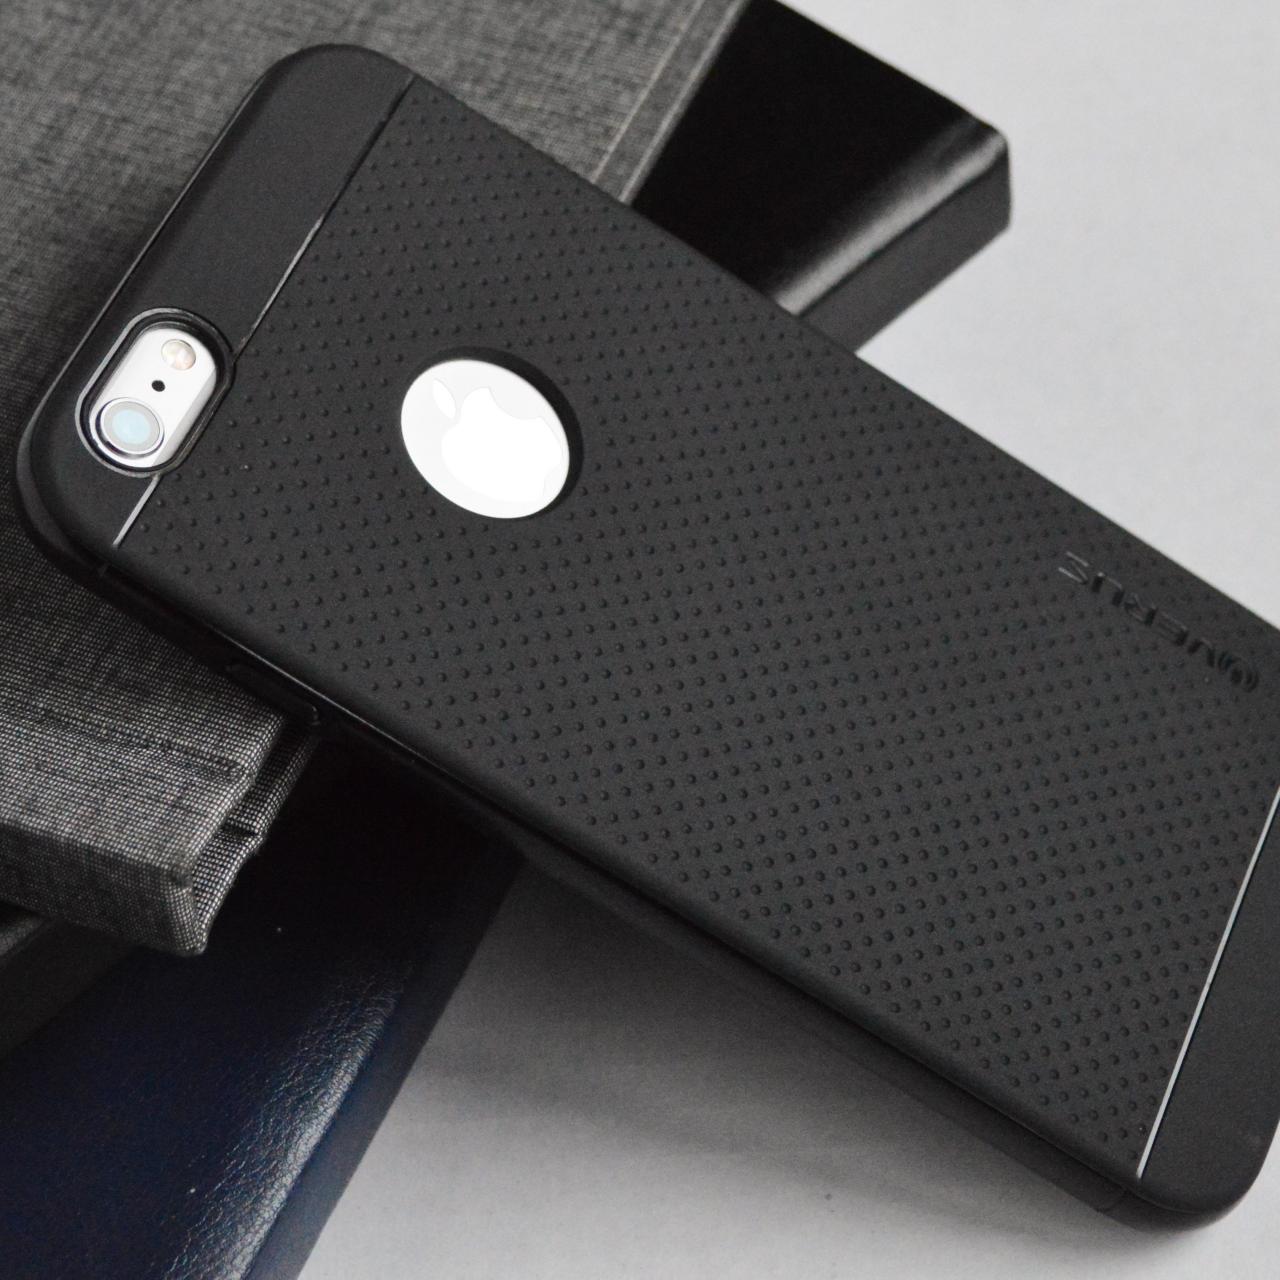 Black On Black Bumper And Tpu Cover High Quality Verus Case For Iphone 6 Iphone 6 Plus 4.7" 5.5"